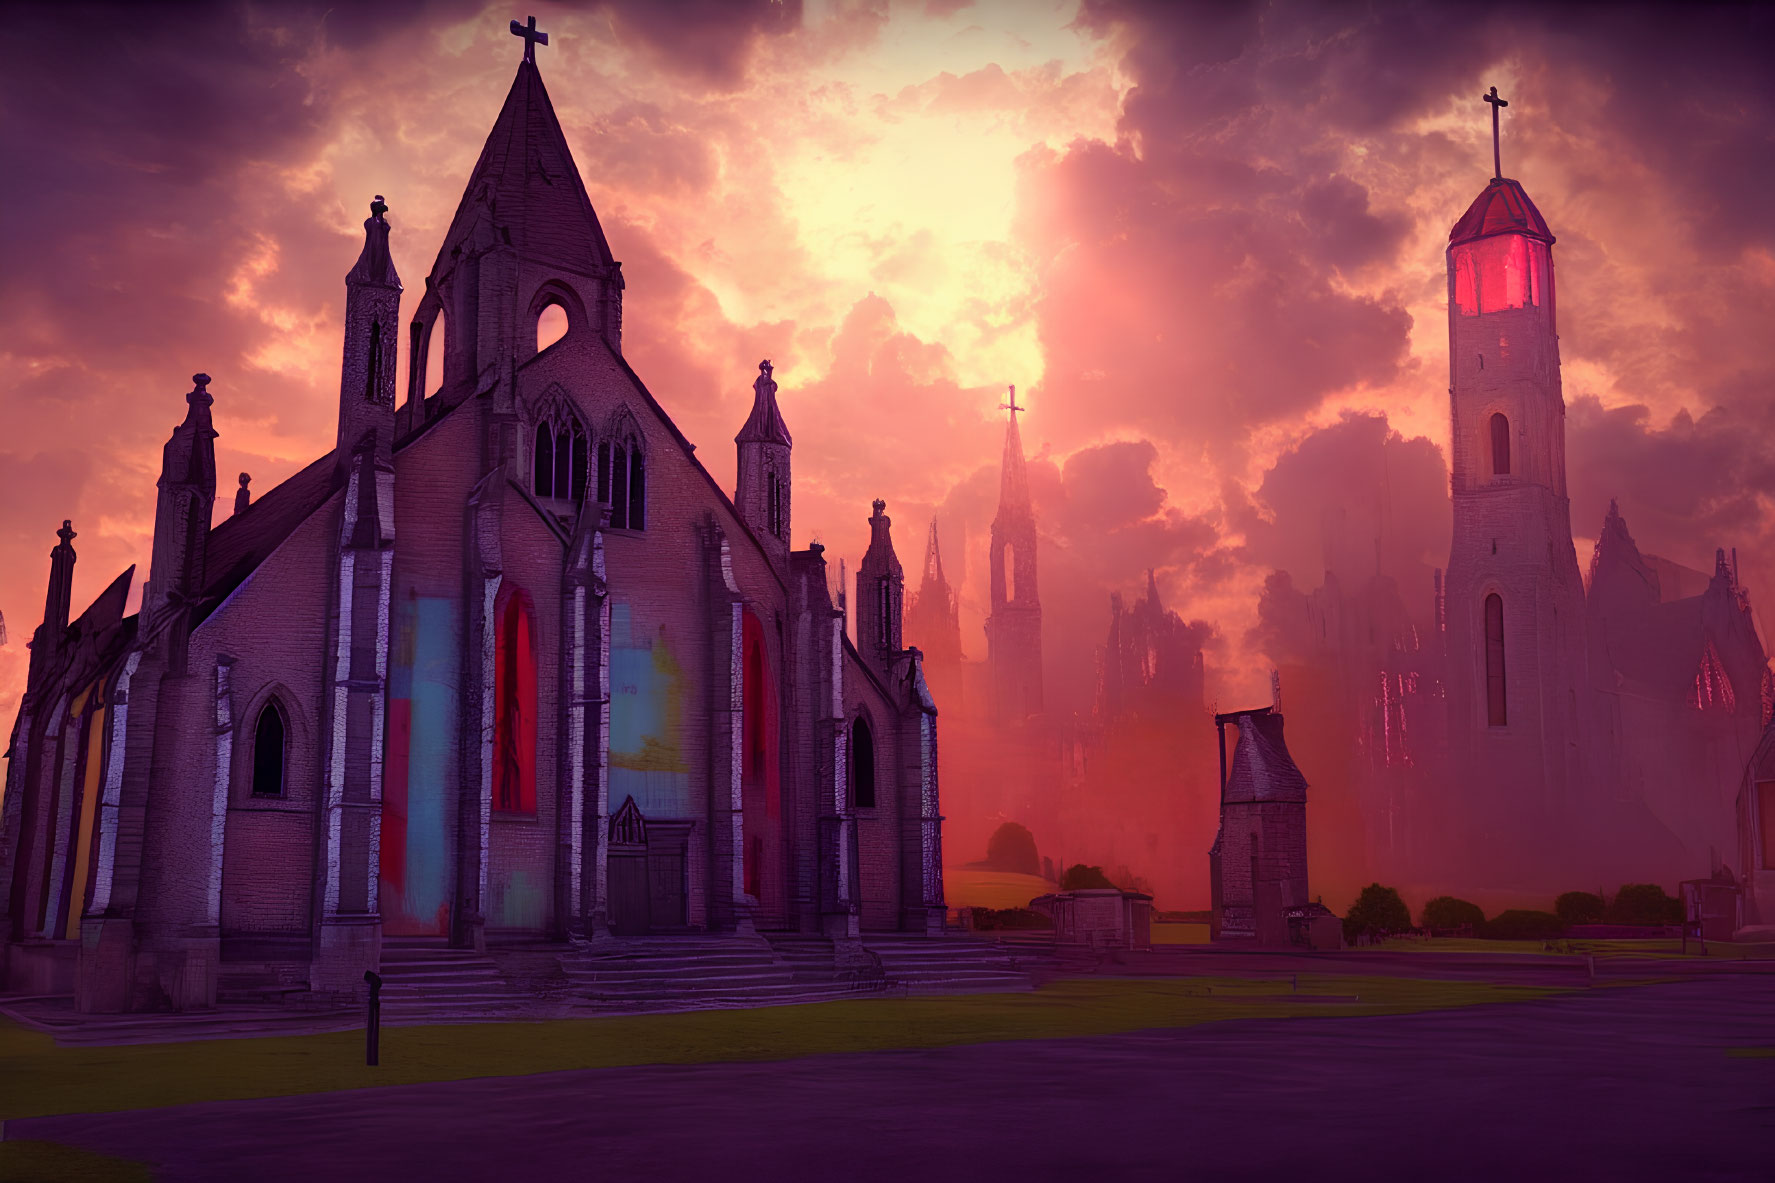 Gothic Church Silhouettes in Red Sunset Sky